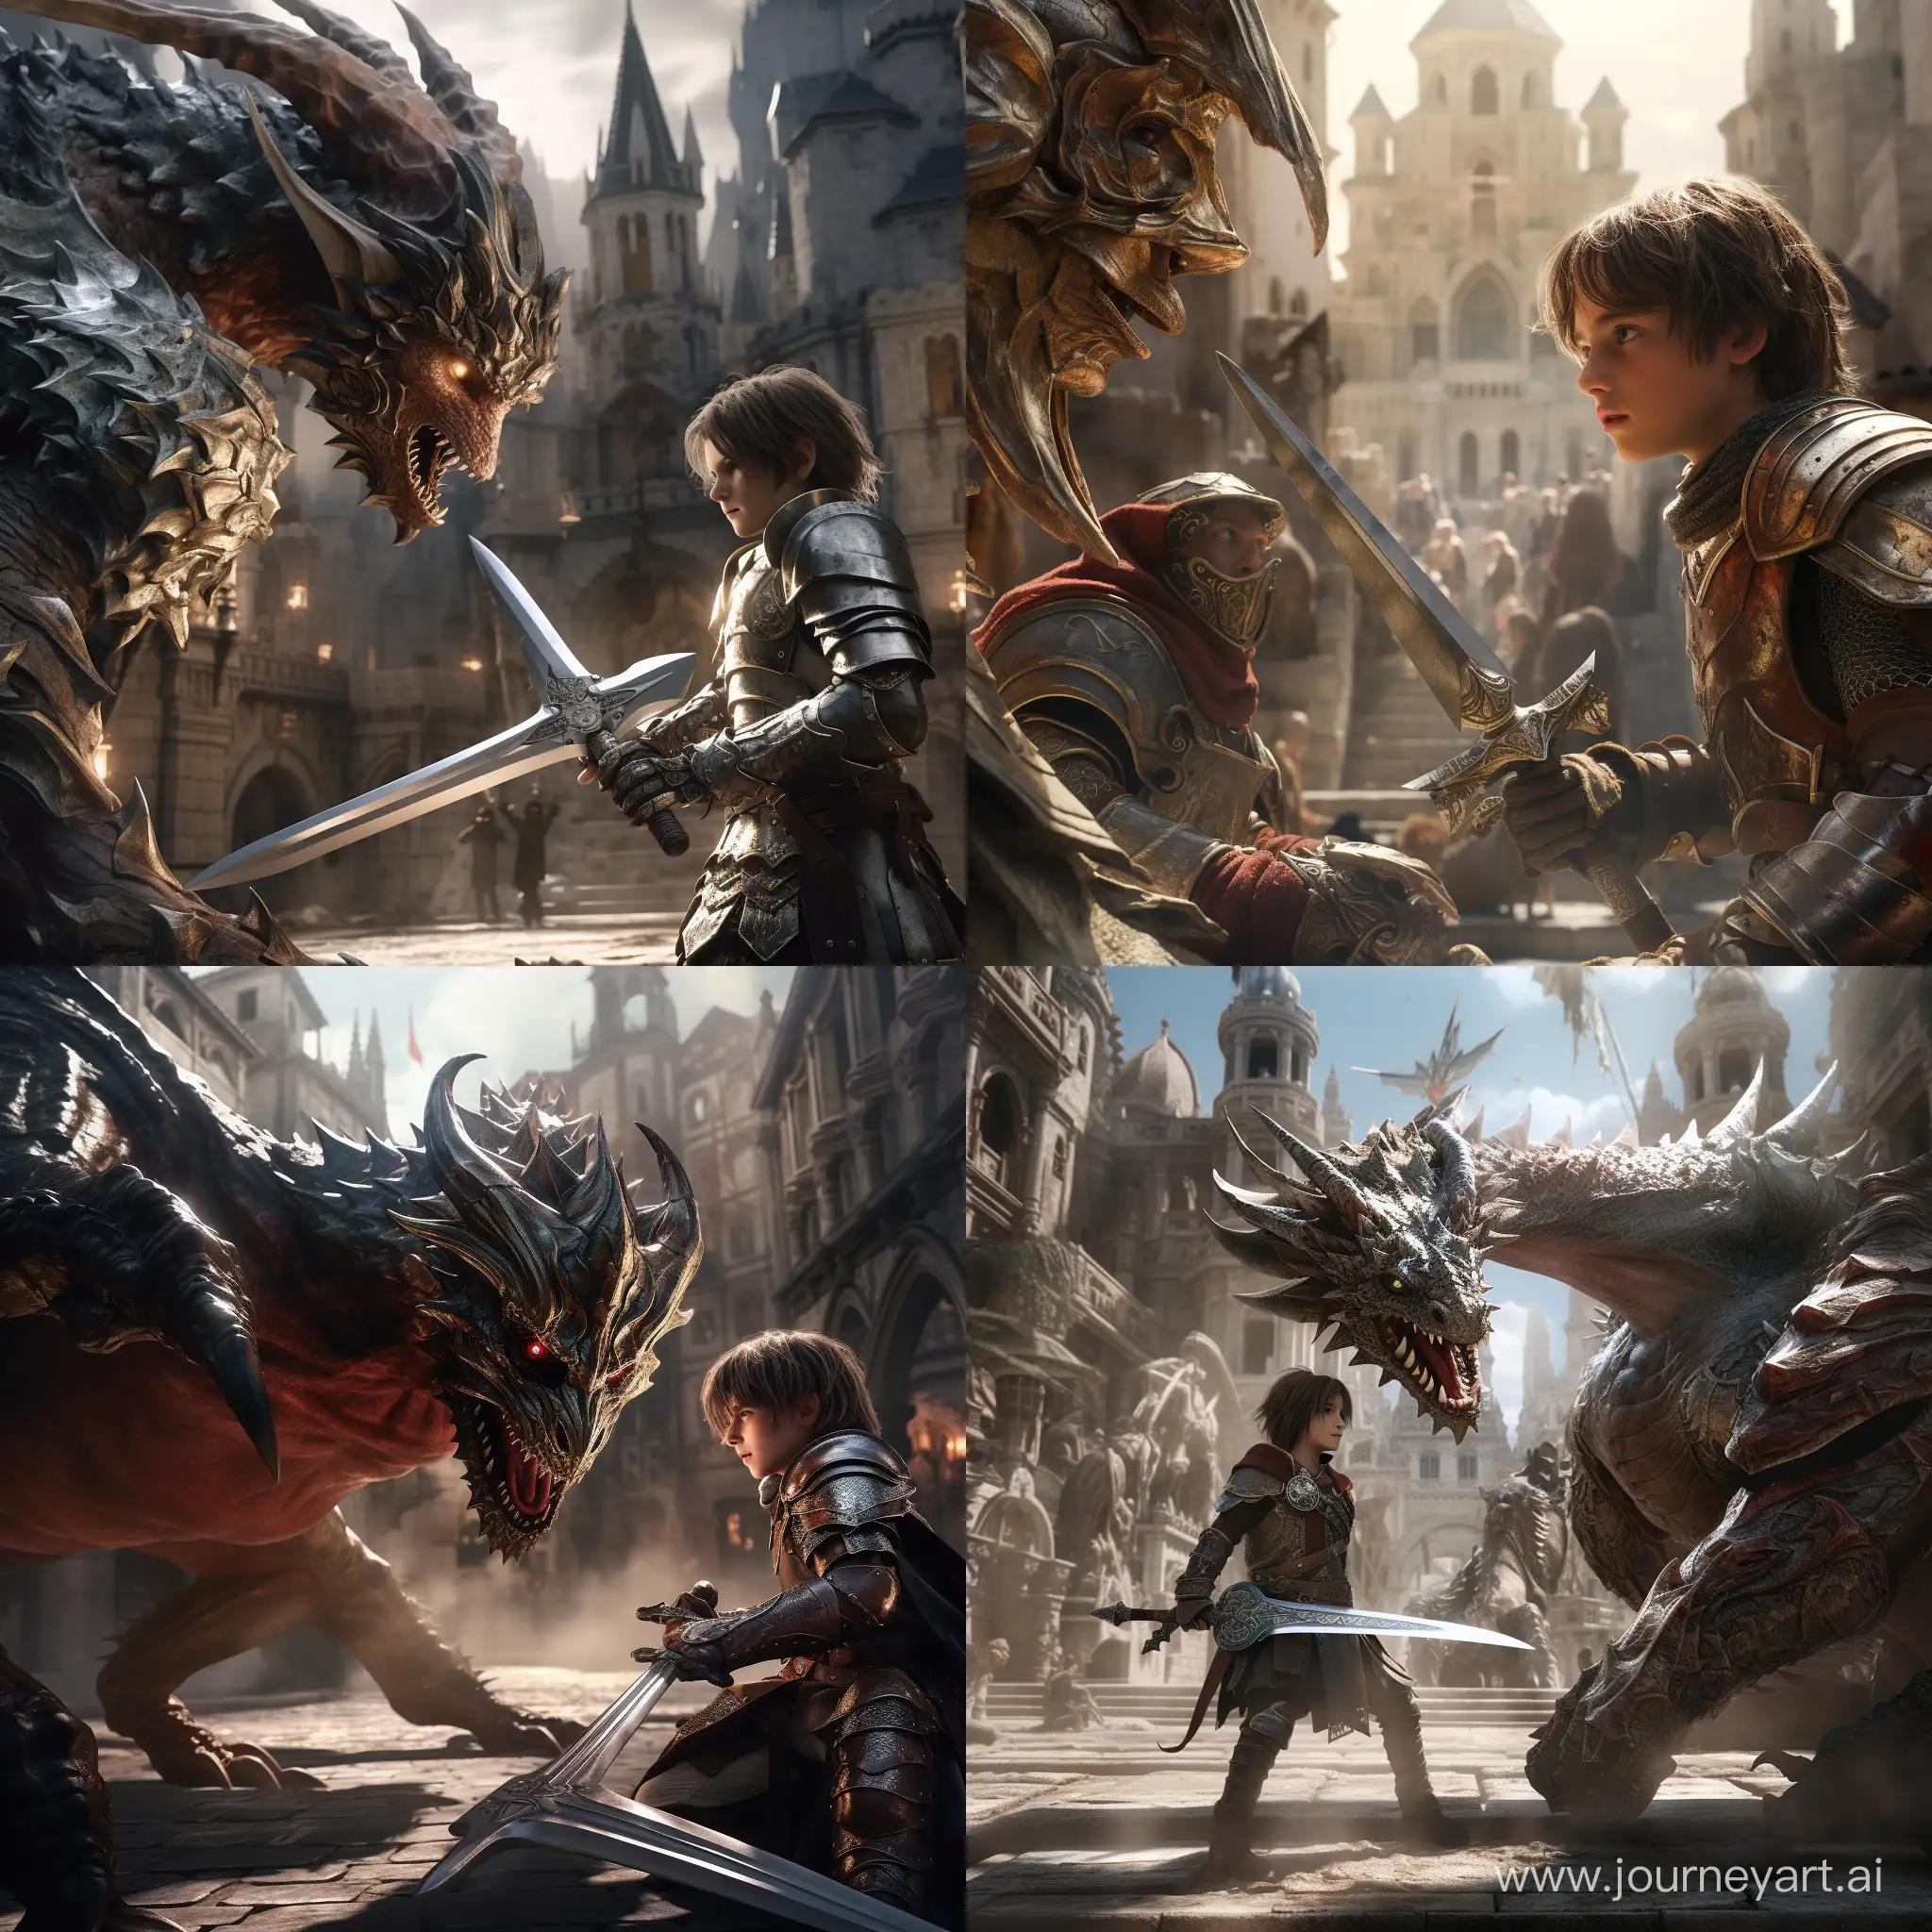 a cinematic scene of two boys with an armor and a sword fighting against a dragon in a medieval city